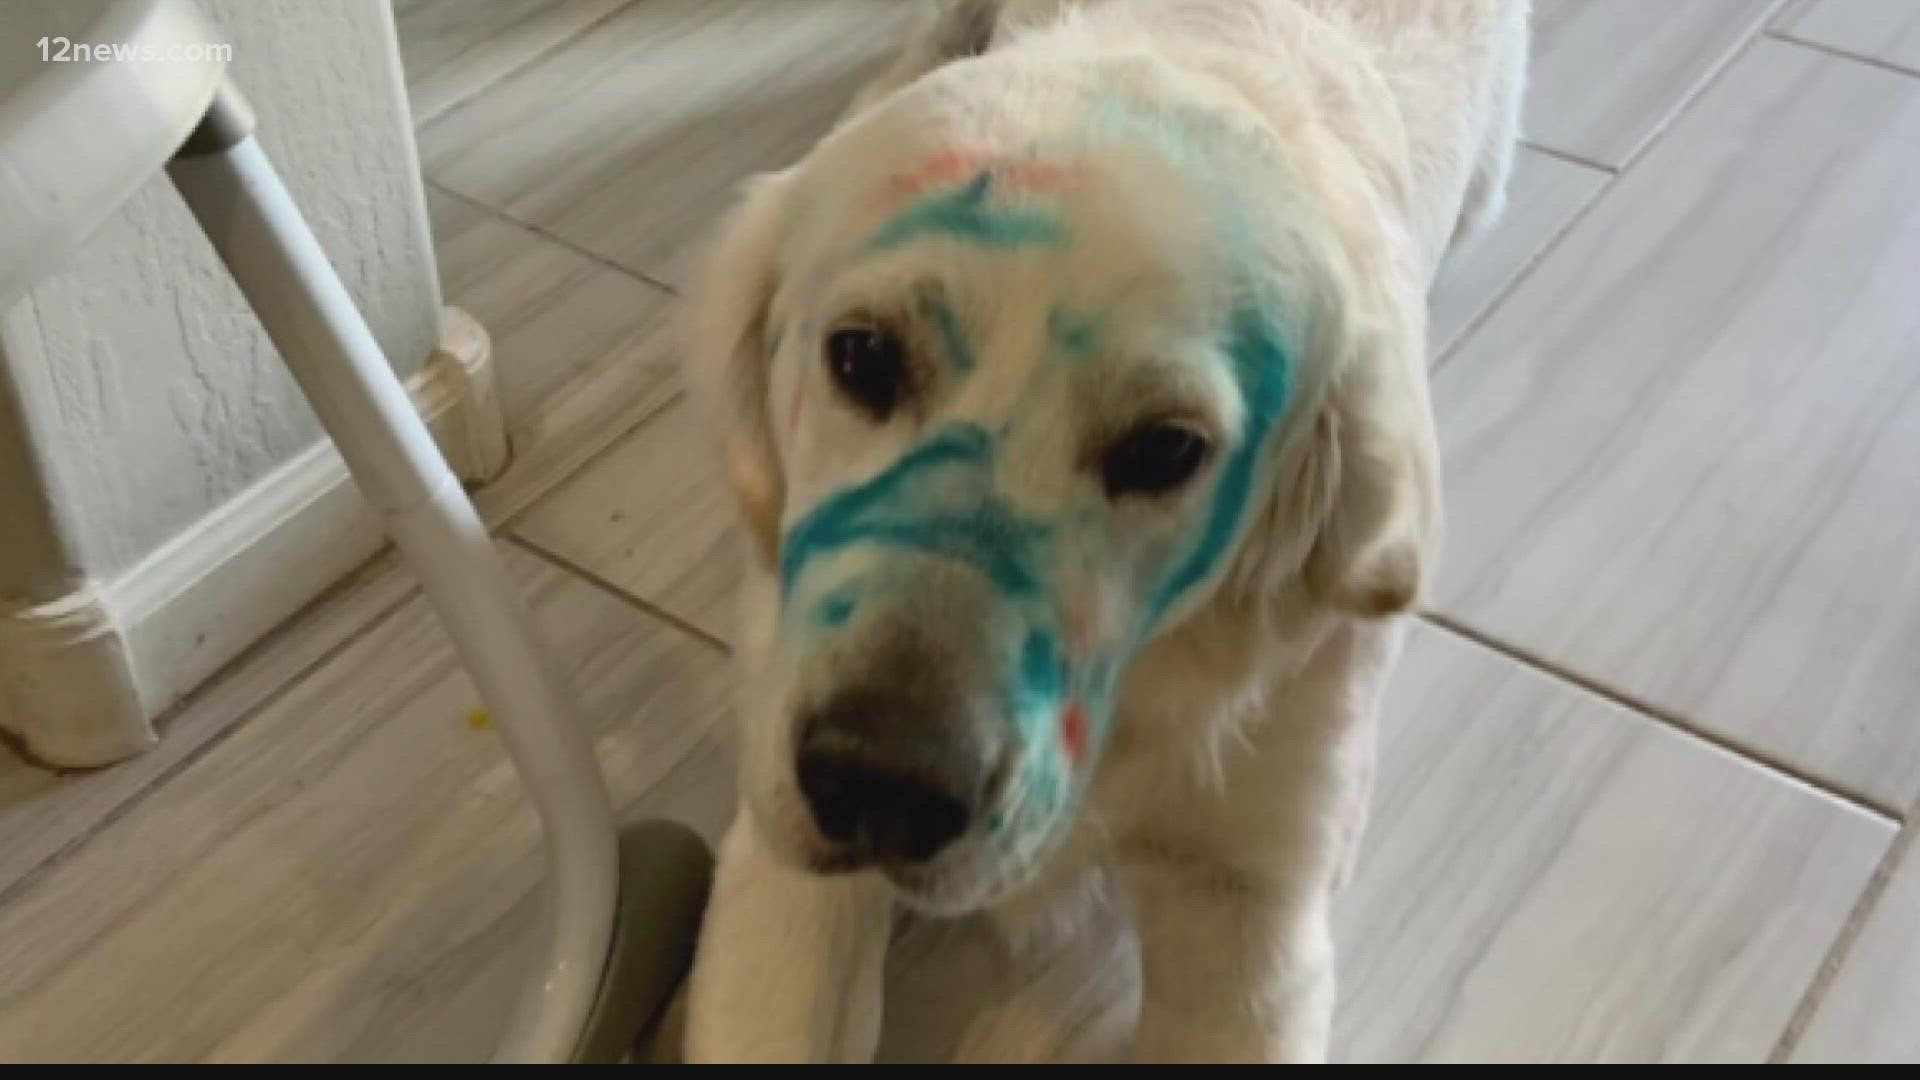 Larry the 10-month-old golden retriever ran up to his owners with a mysterious blue color all over his face.